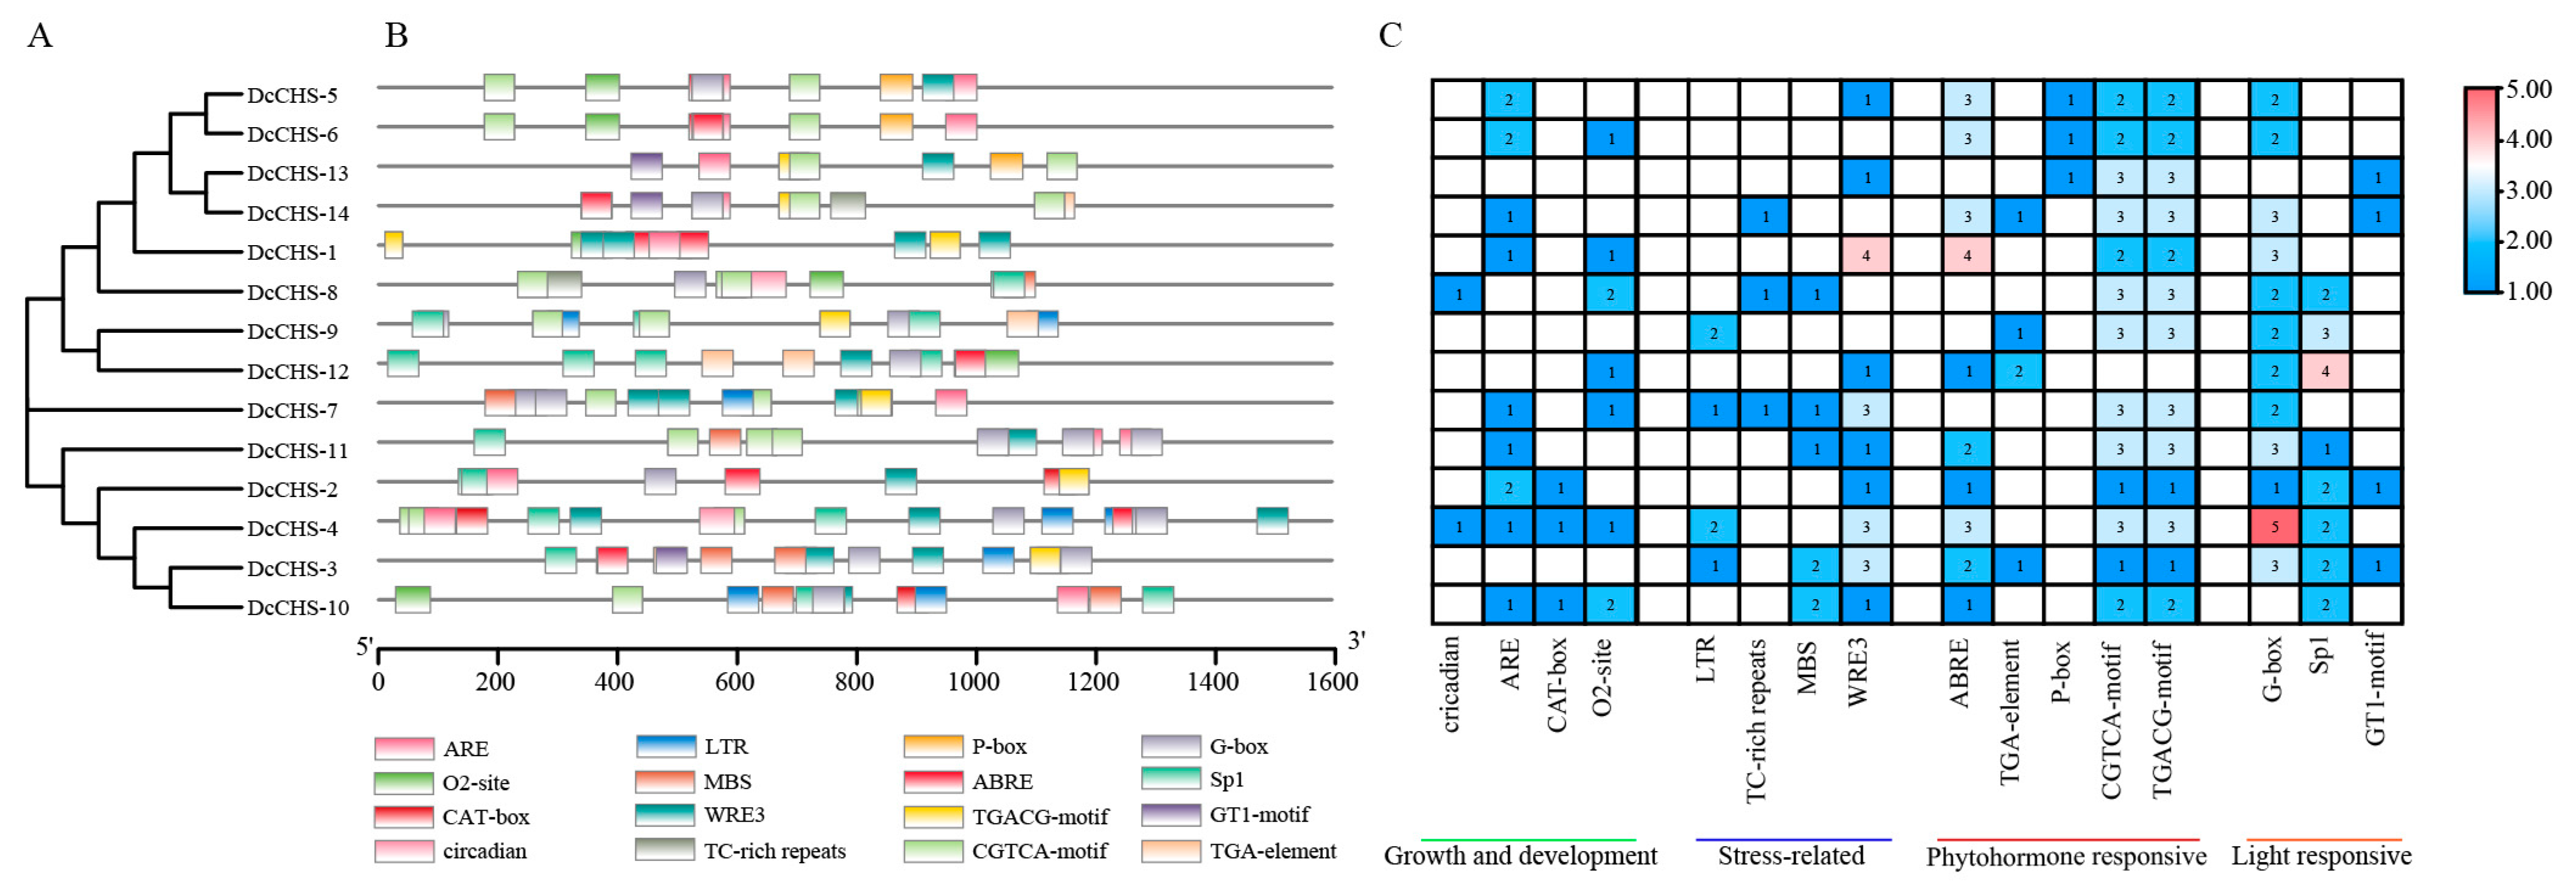 Agronomy | Free Full-Text | Genome-Wide Identification and Expression ...